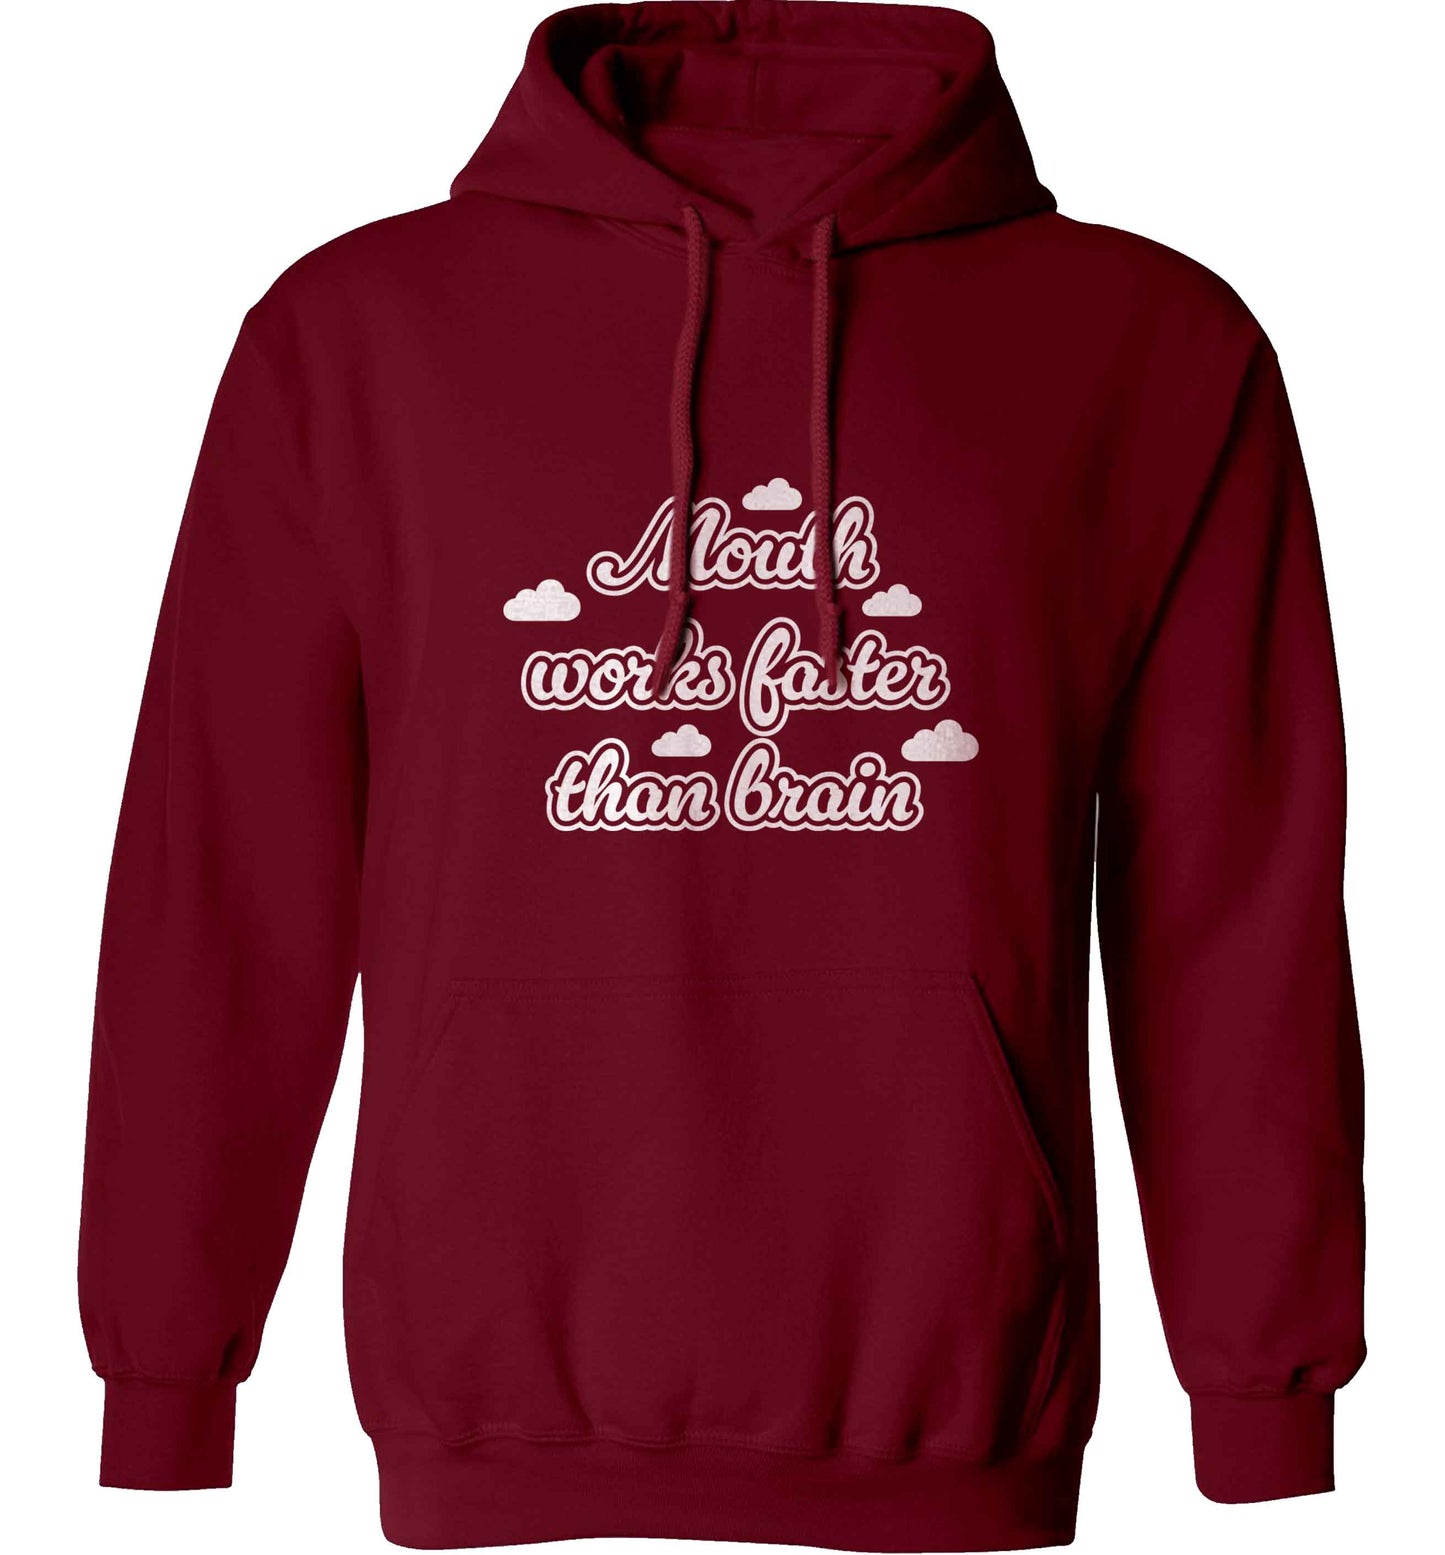 Mouth works faster than brain adults unisex maroon hoodie 2XL